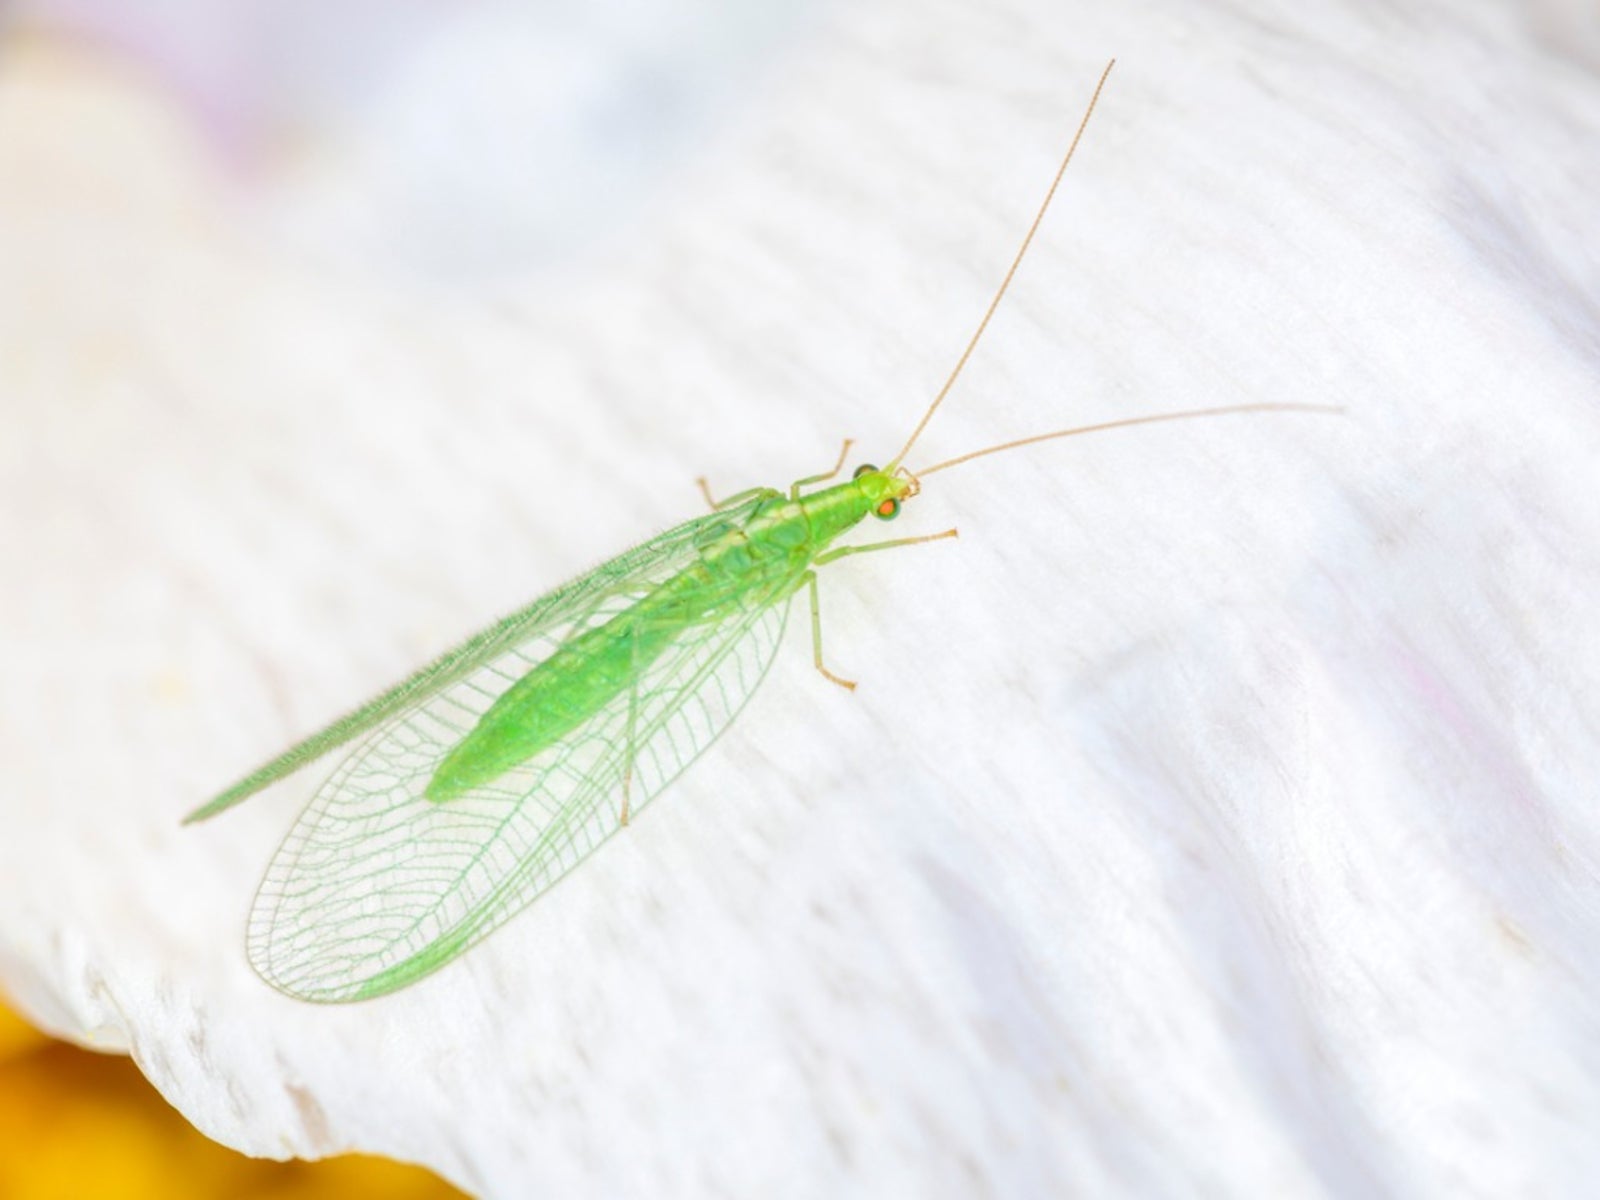 Lacewing Beneficial Insects - Taking Advantage Of Green Lacewings In The  Garden